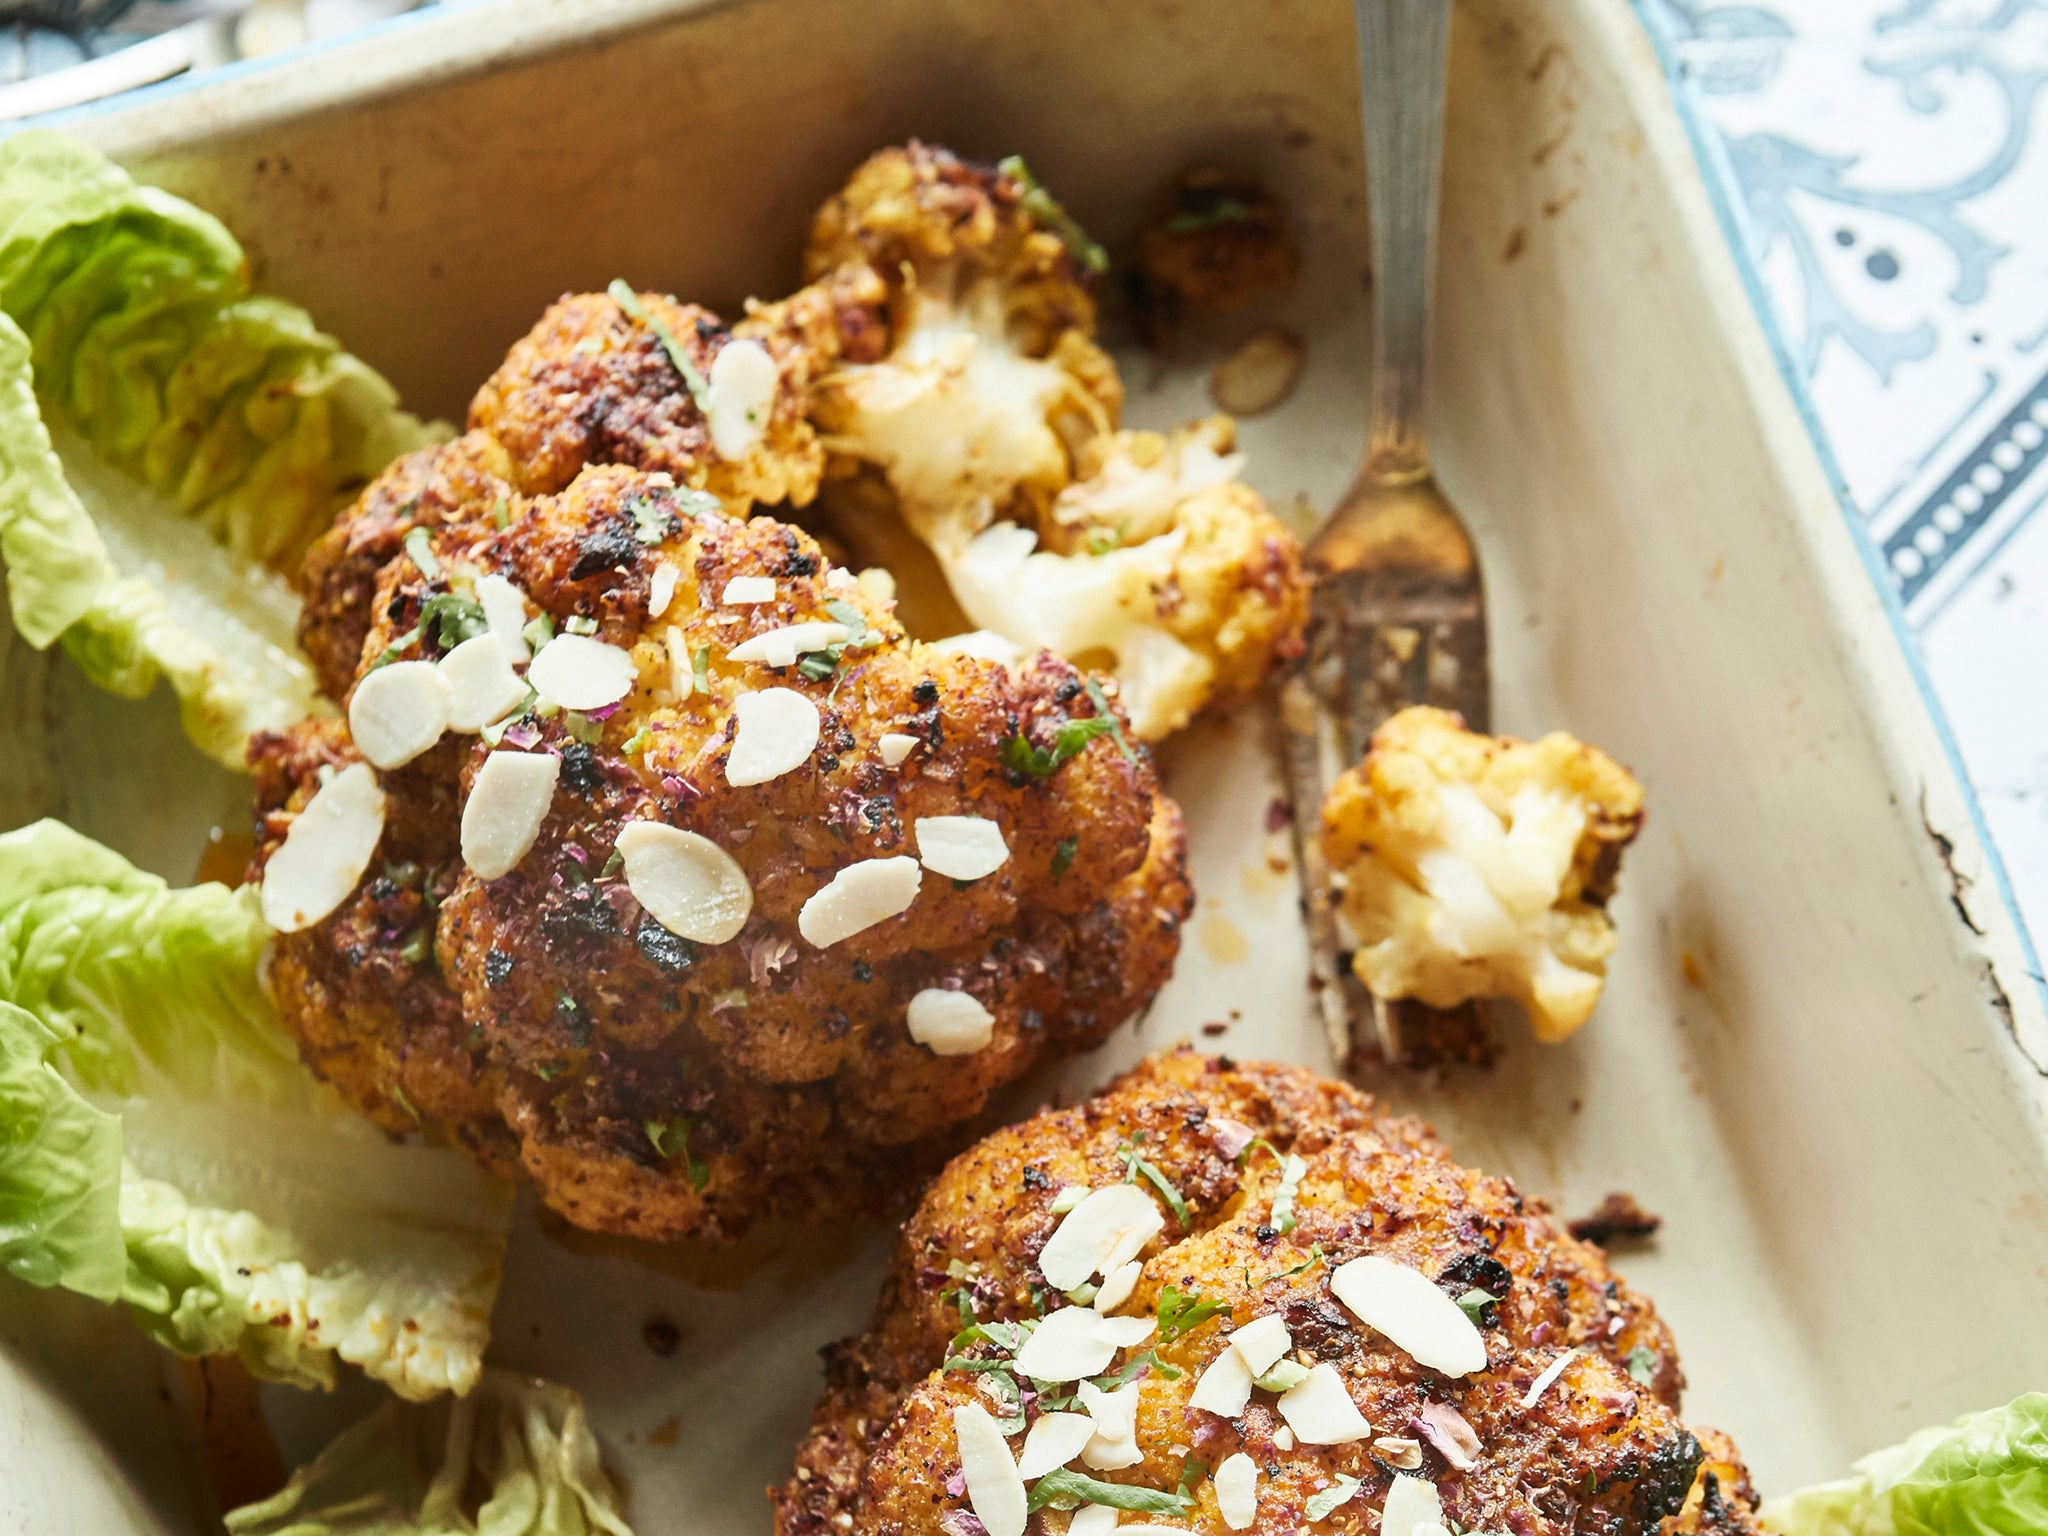 Although it’s typically served with meat or seafood, you could make it a veggie main with a whole cauliflower